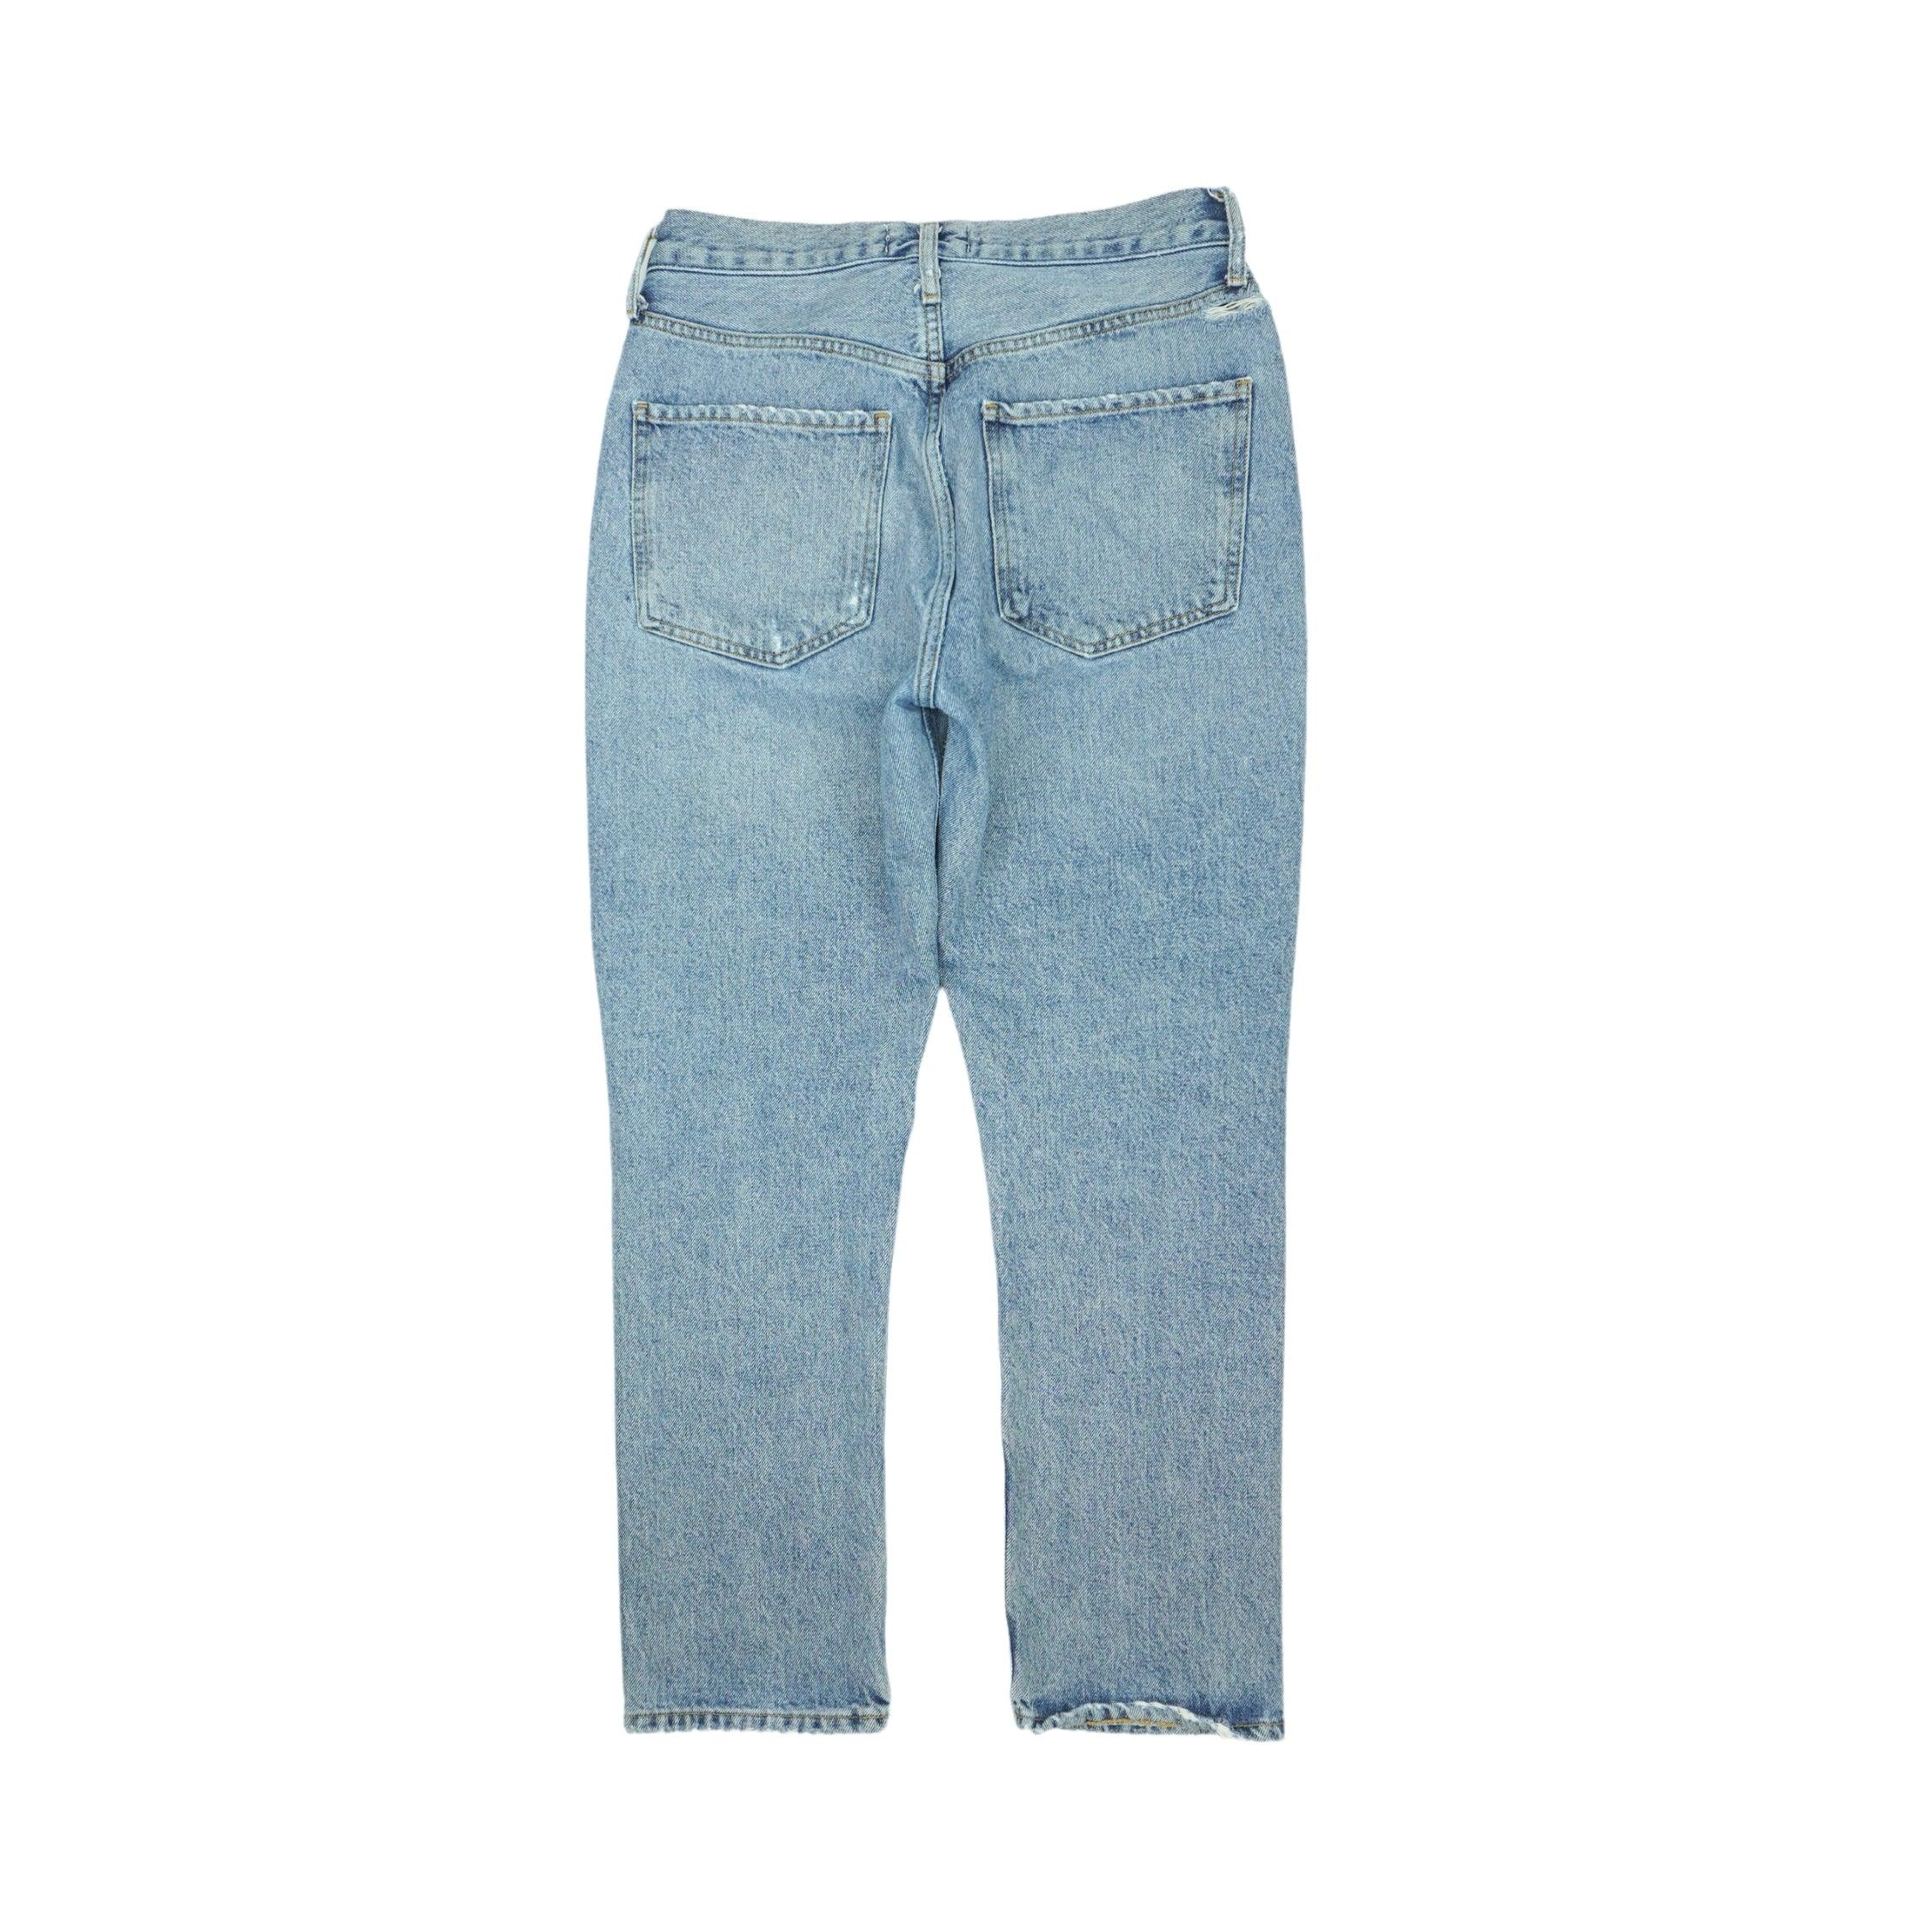 AGOLDE Jeans - Women's 27 - Fashionably Yours